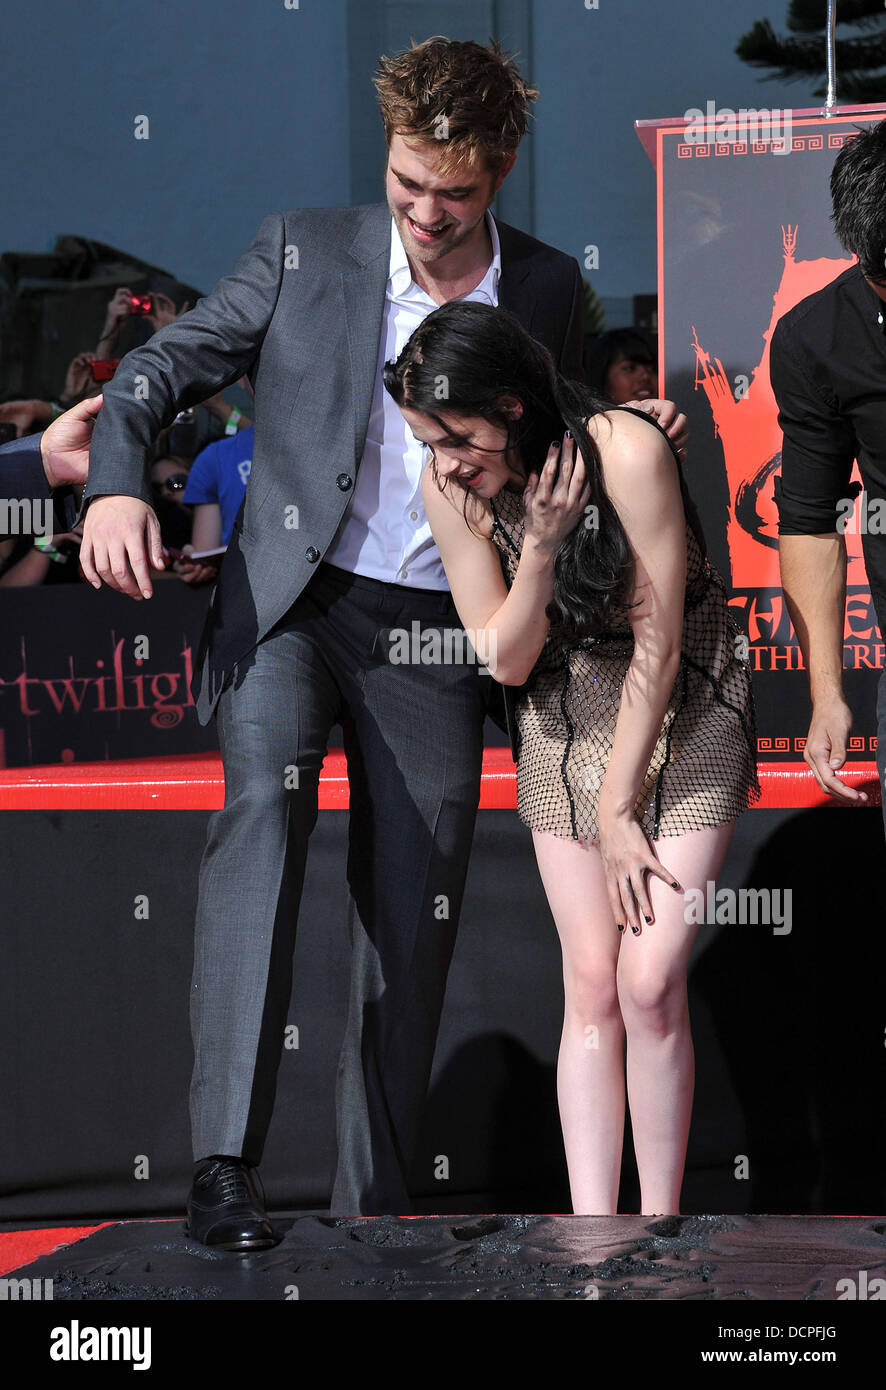 Robert Pattinson + Kristen Stewart  Stars of 'The Twilight Saga' films are honoured with a Hand and Footprint Ceremony outside Grauman's Chinese Theatre  Los Angeles, California - 03.11.11 Stock Photo